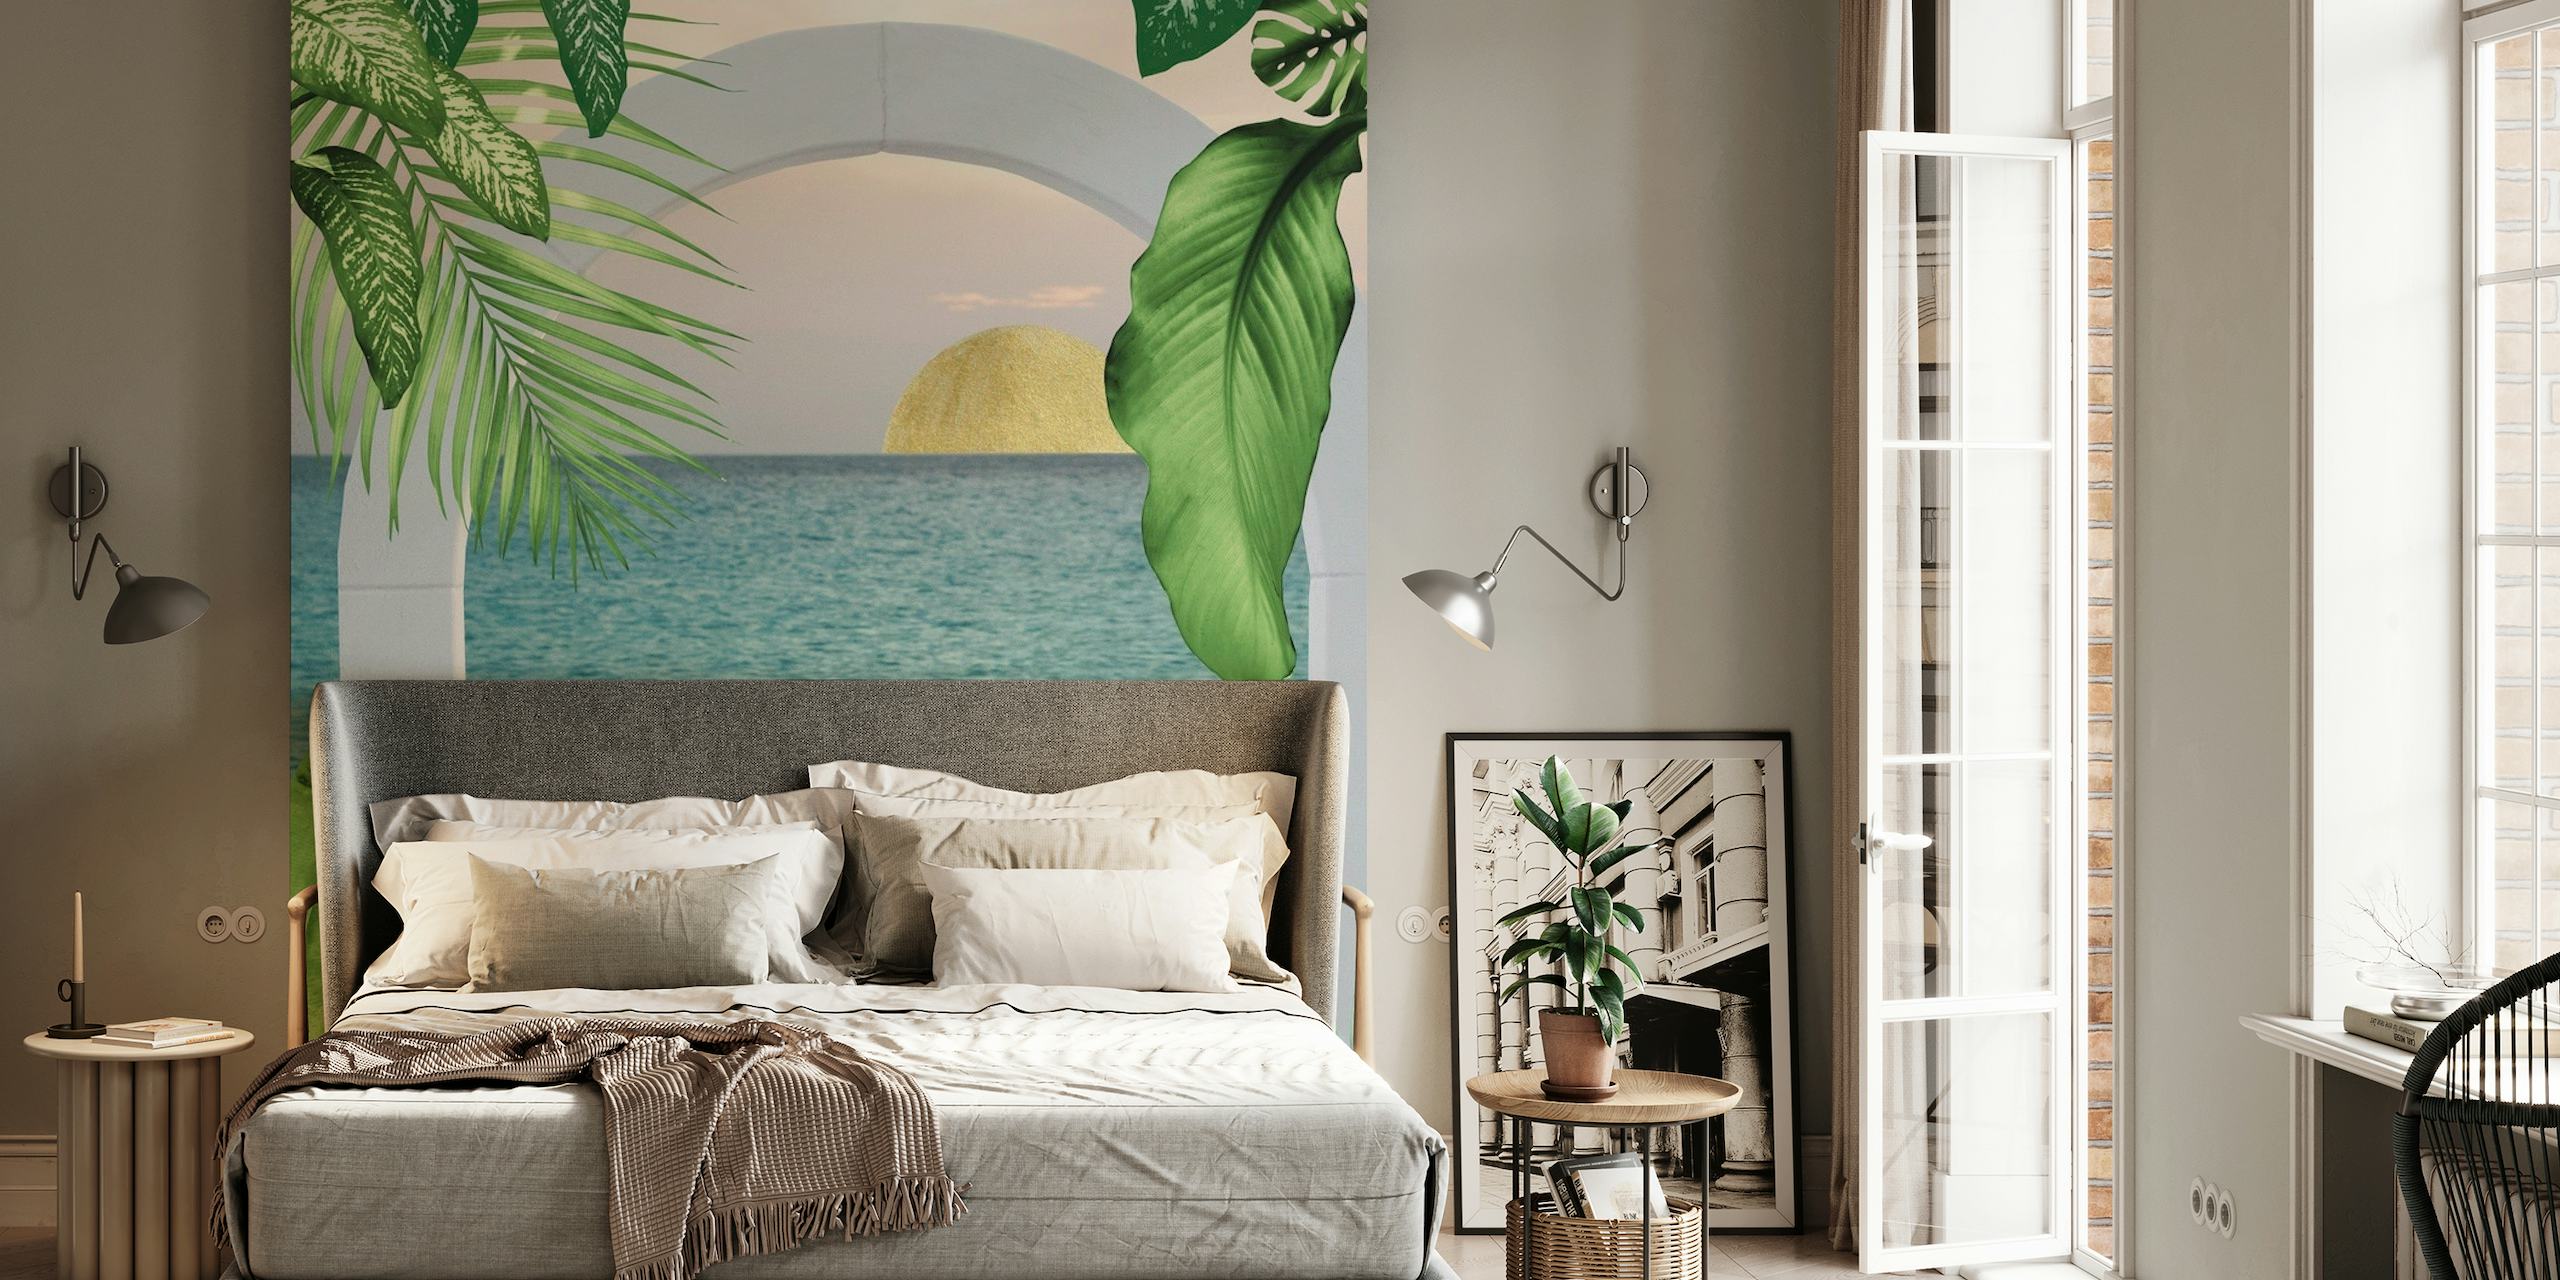 Santorini meets Curacao wall mural showing a mix of Mediterranean white arches and tropical leaves with a sea view